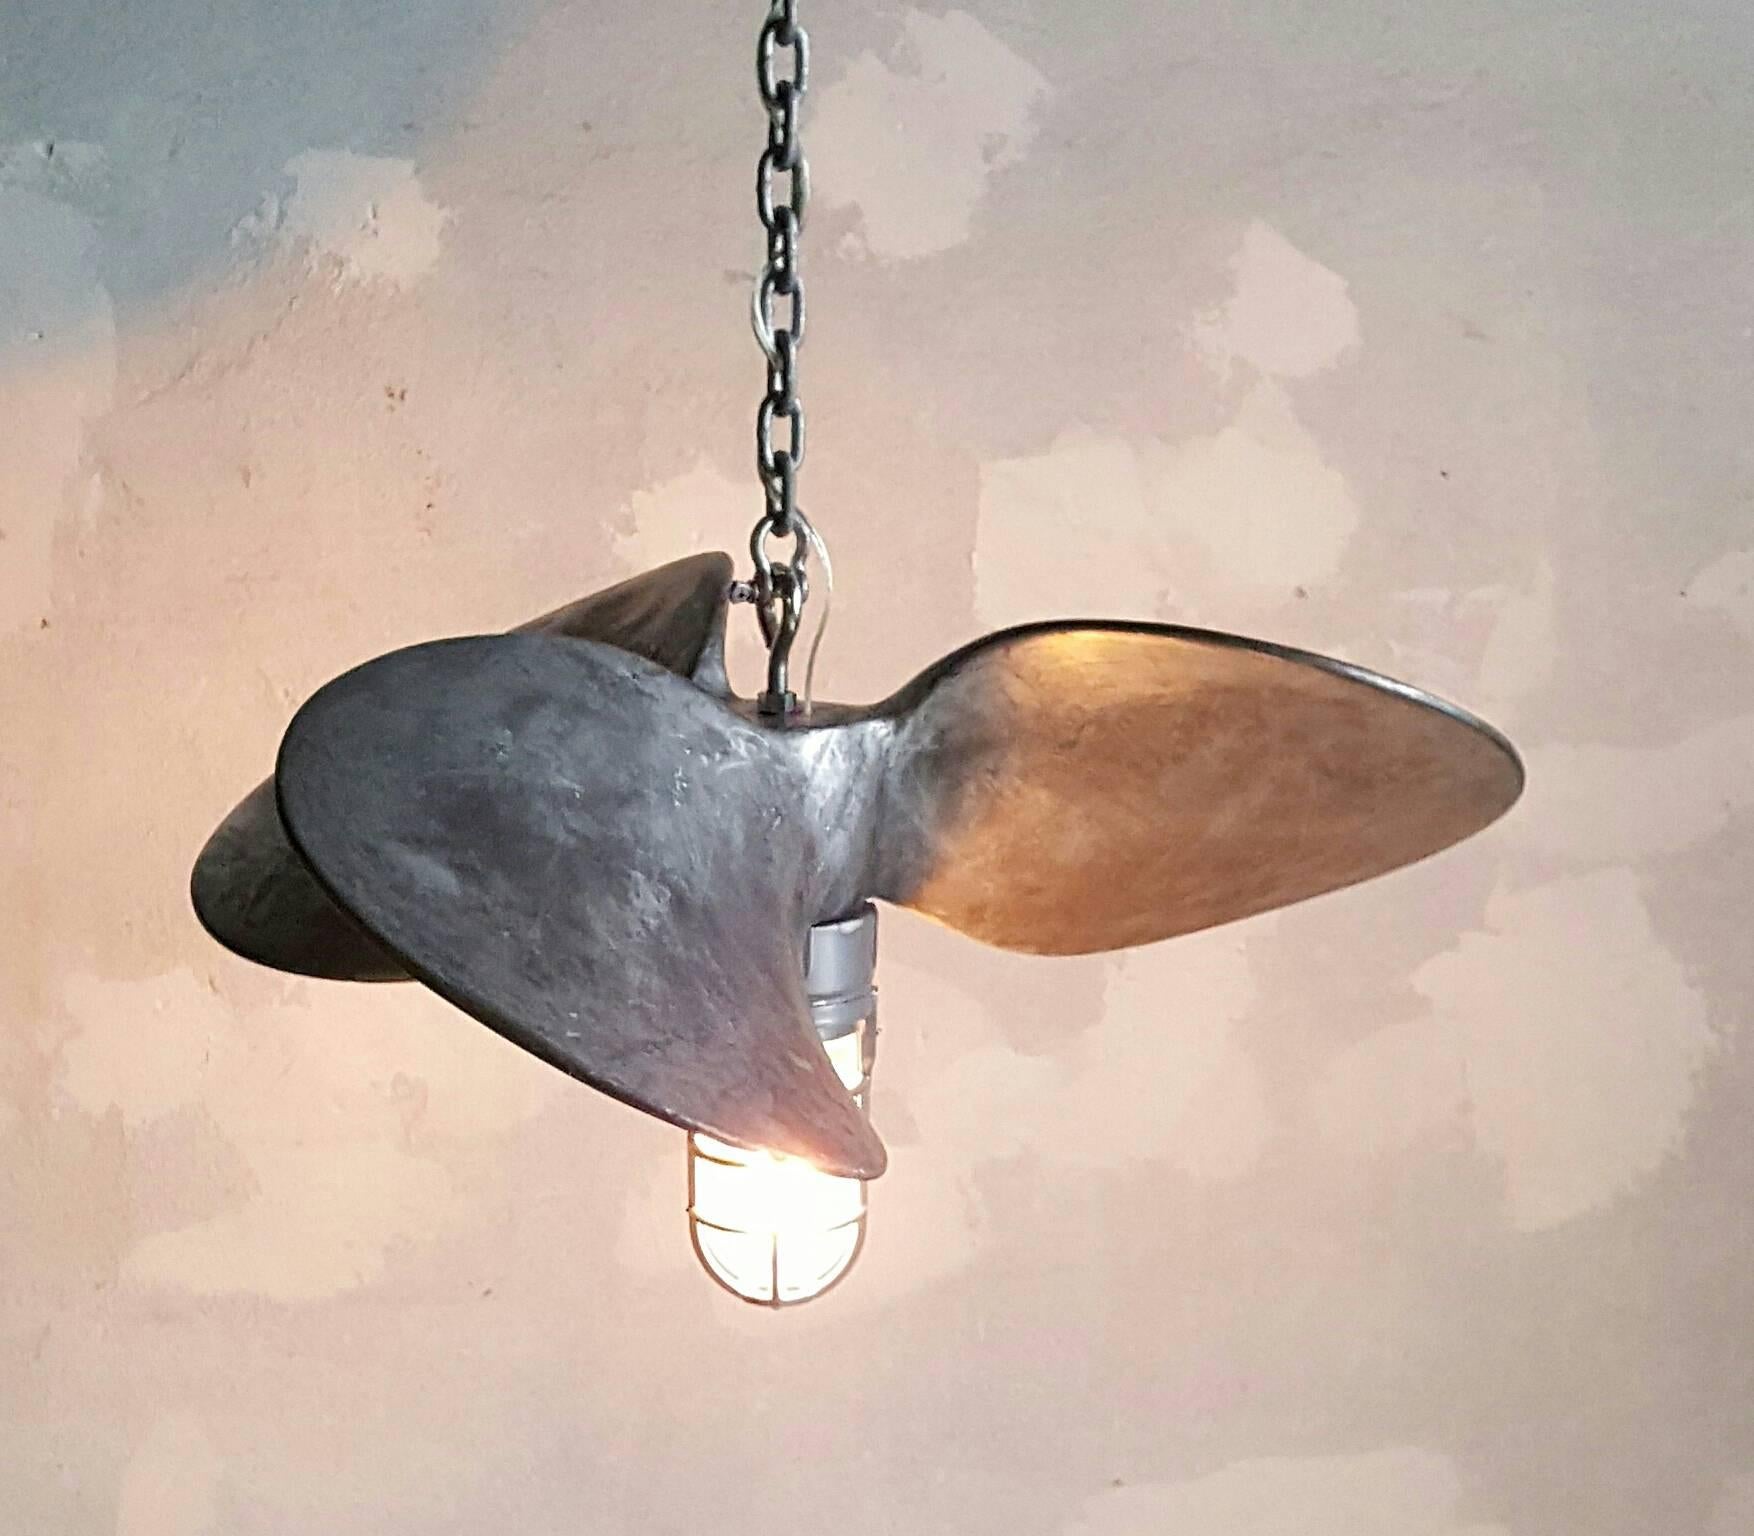 Unusual Industrial aluminium nautical propeller hanging light, wonderful patina. Explosion proof light fixture, Edison exposed filament light bulb. Perfect addition to loft kitchen. Two matching slightly smaller fixtures available.